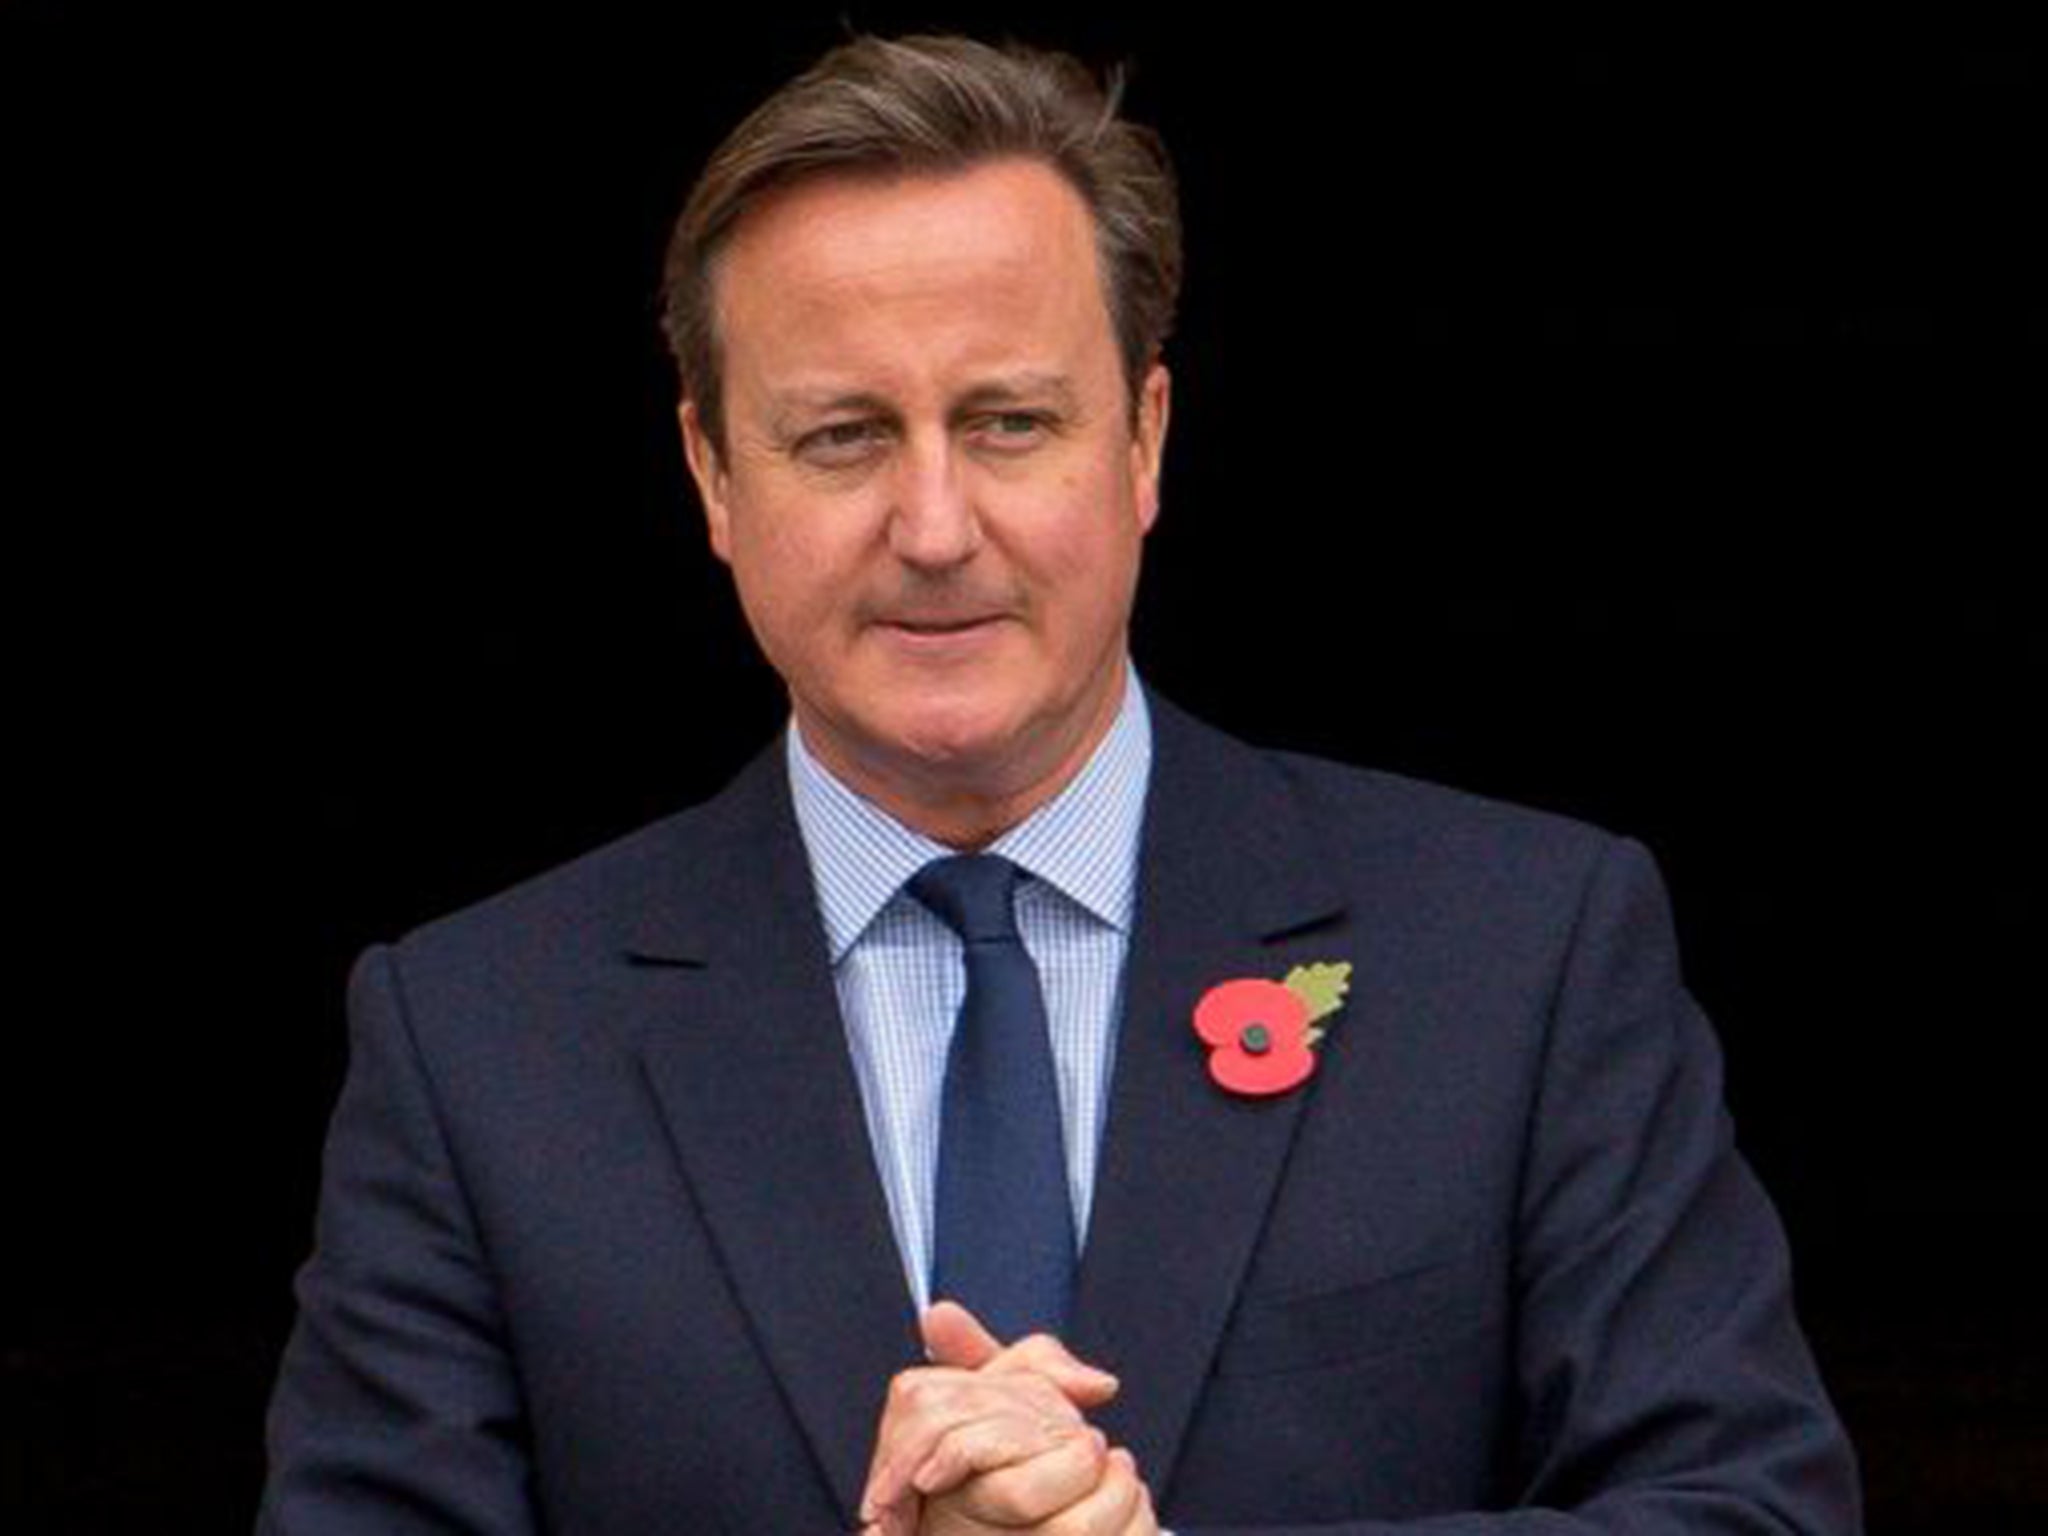 David Cameron is attending a summit with northern European leaders in Iceland